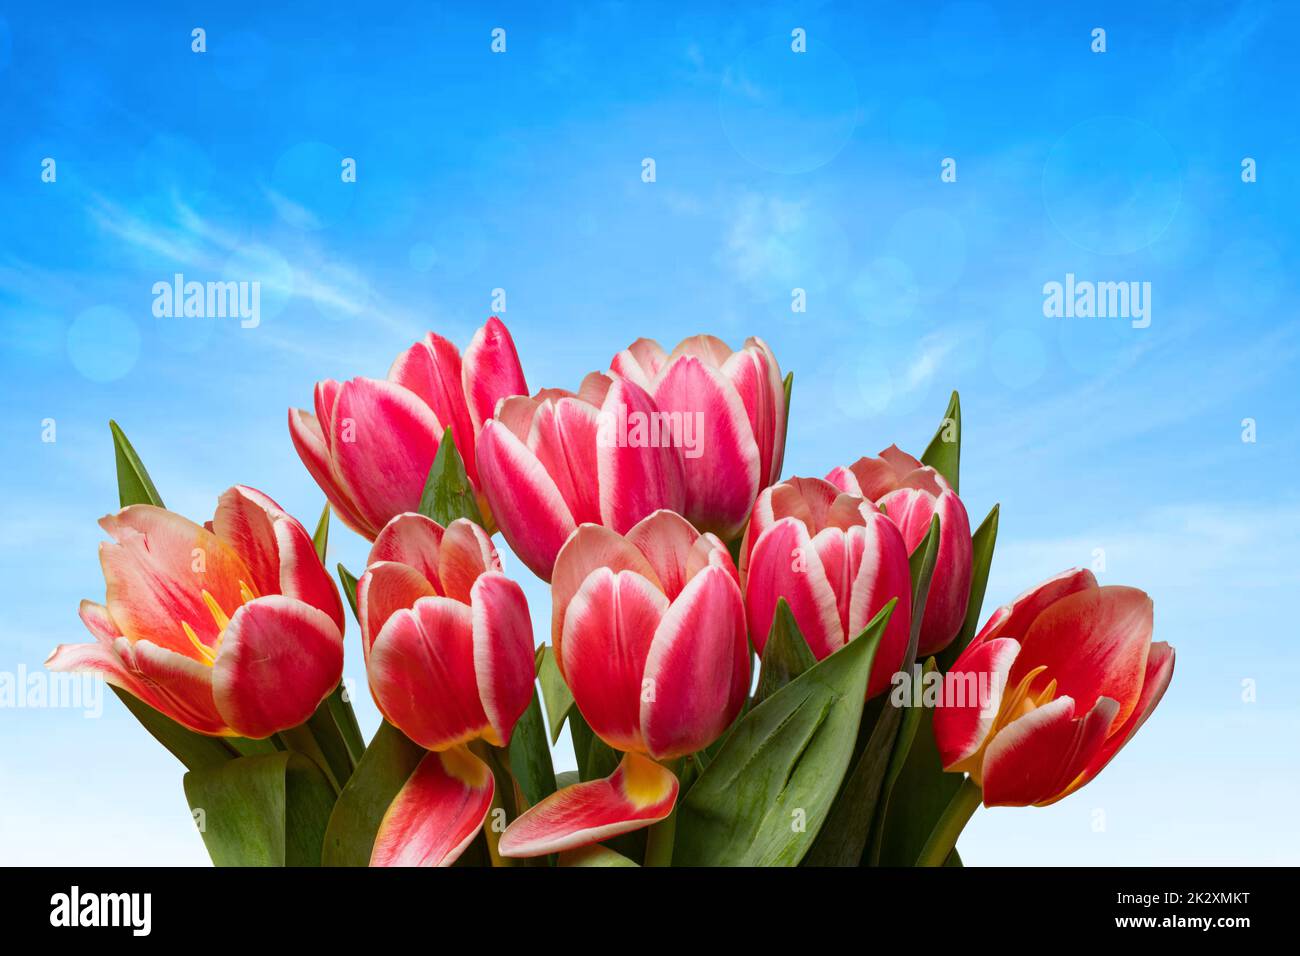 Greeting card template. Closeup of a fresh beautiful red tulips bouquet over abstract blurred blue sky background. Space for text design. Spring, valentine, mothers or wedding day card. Macro. Stock Photo